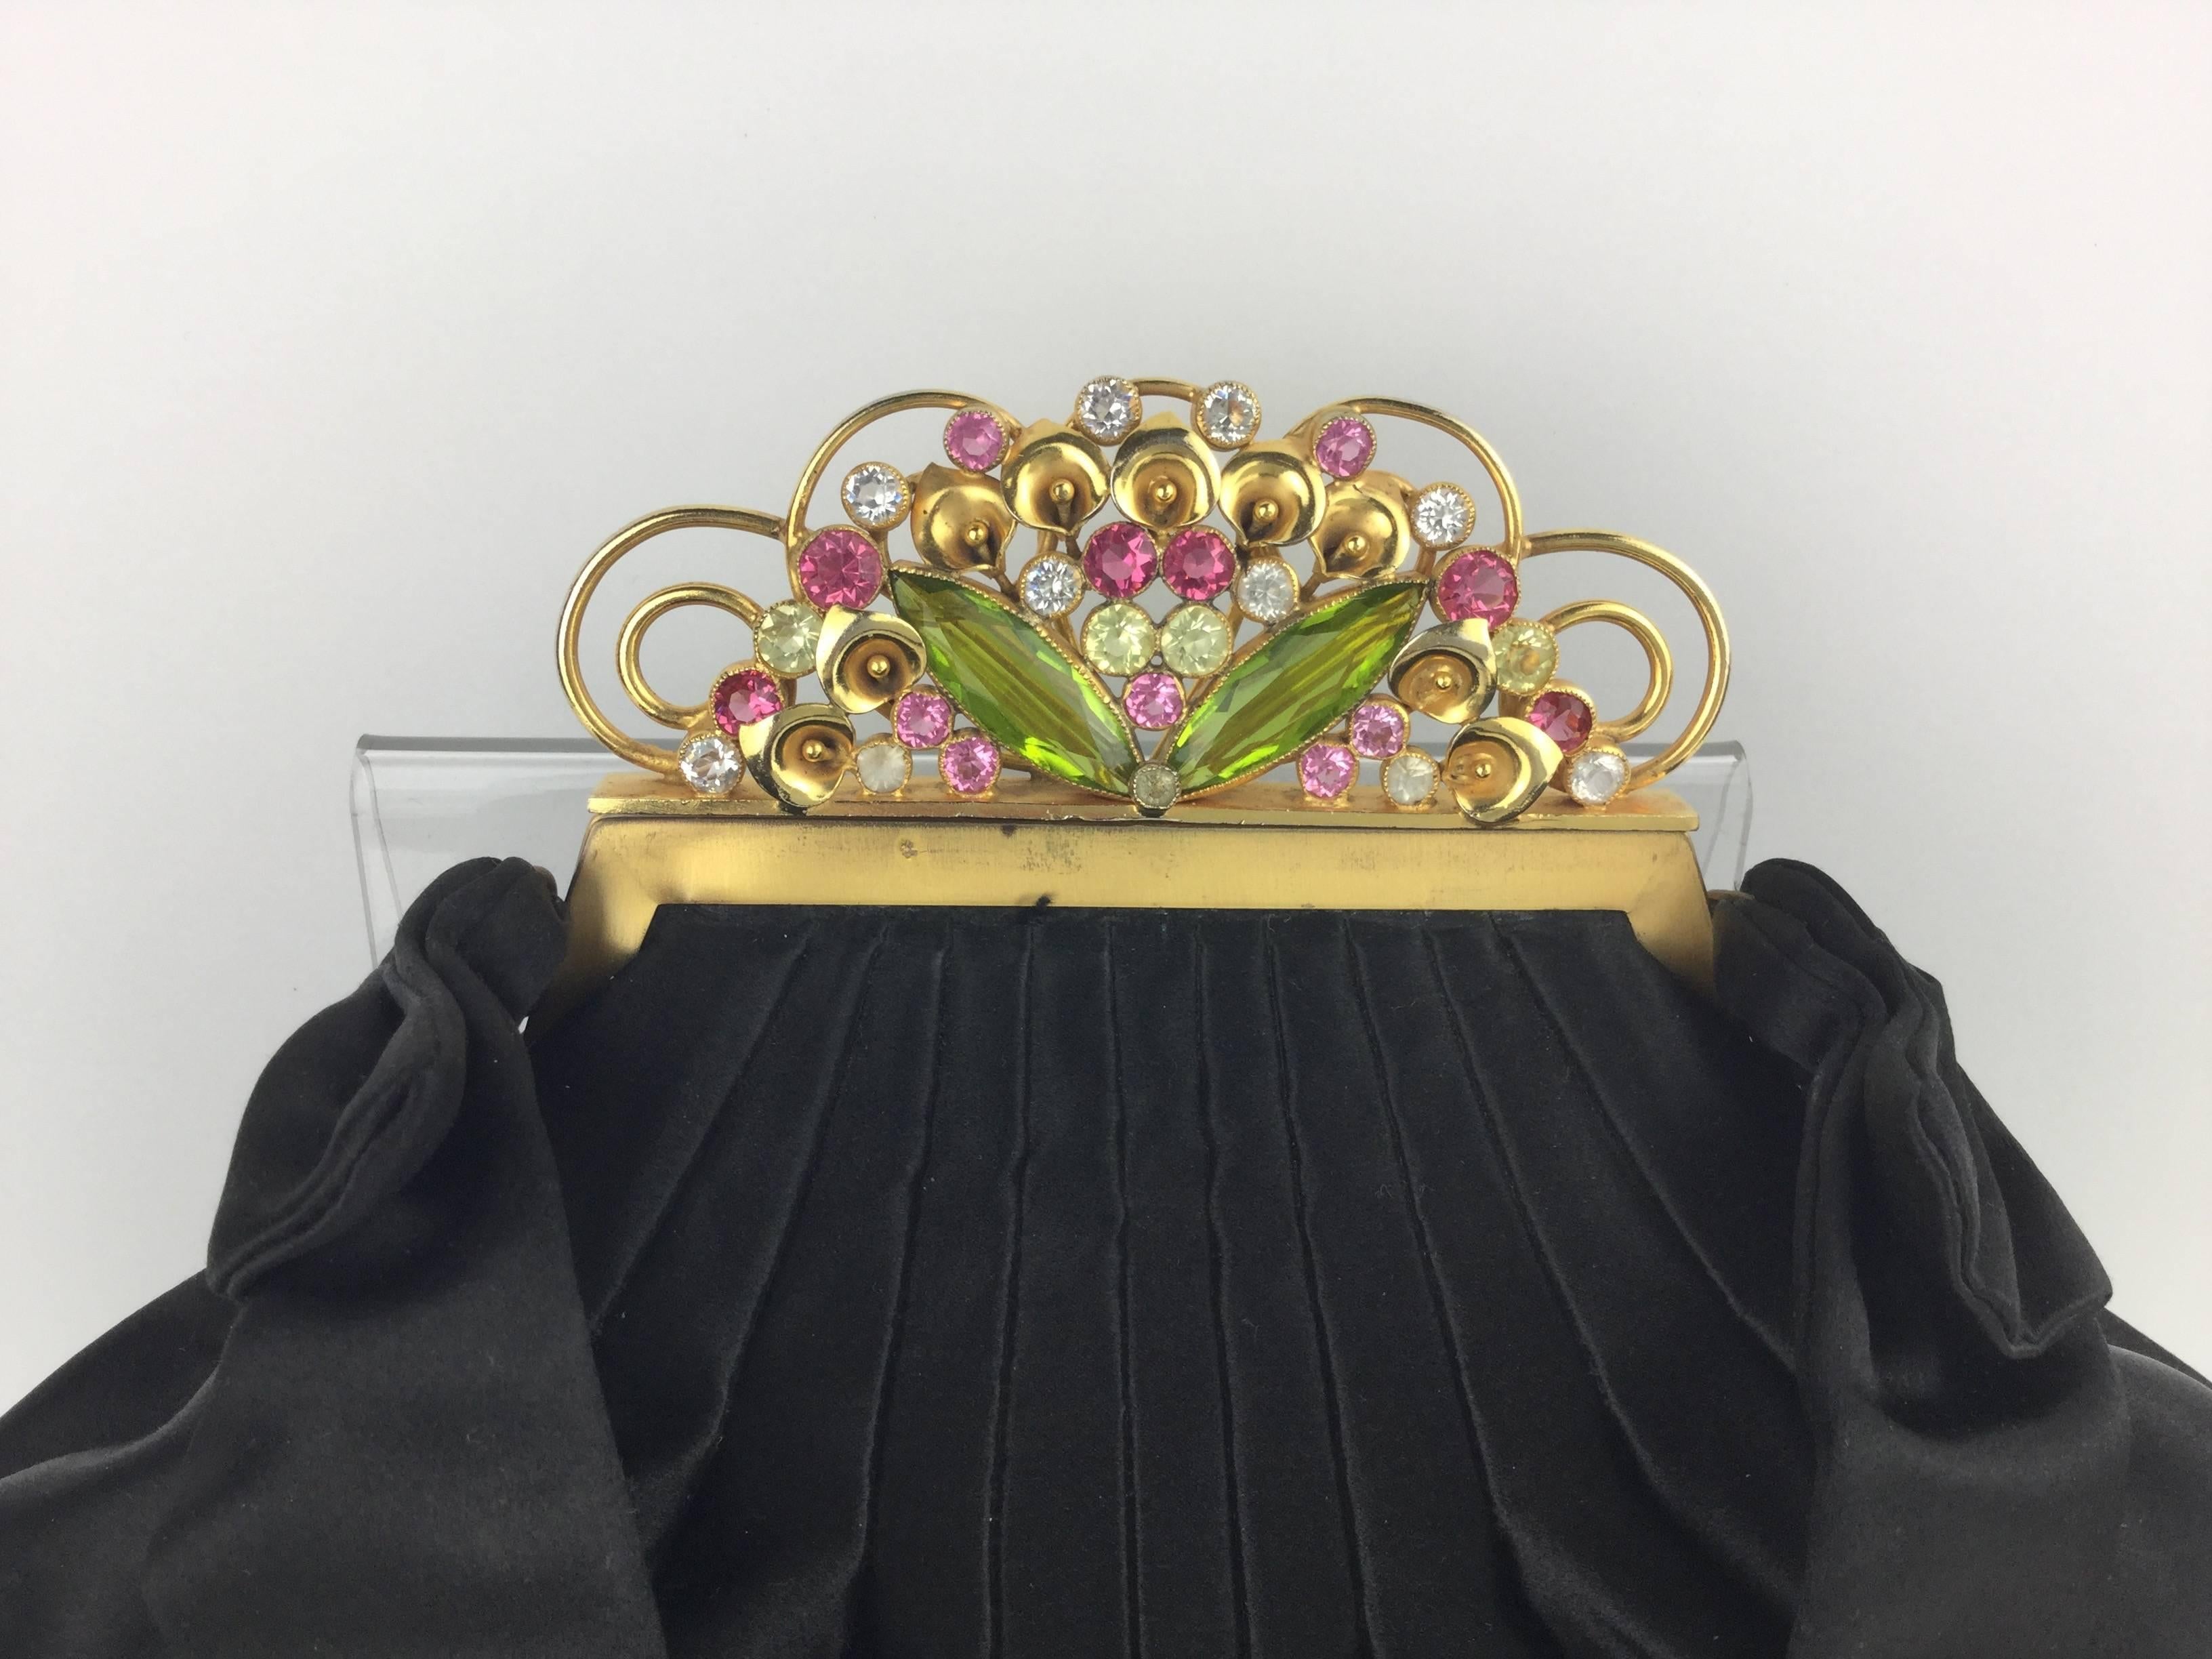 This is one of the rarest and most sought after of all vintage handbags. From Josef of Hollywood's legendary 1930's limited series of floral jewel clasp delights.  Made of rich black pleated satin silk crowned with a spectacular jewel encrusted